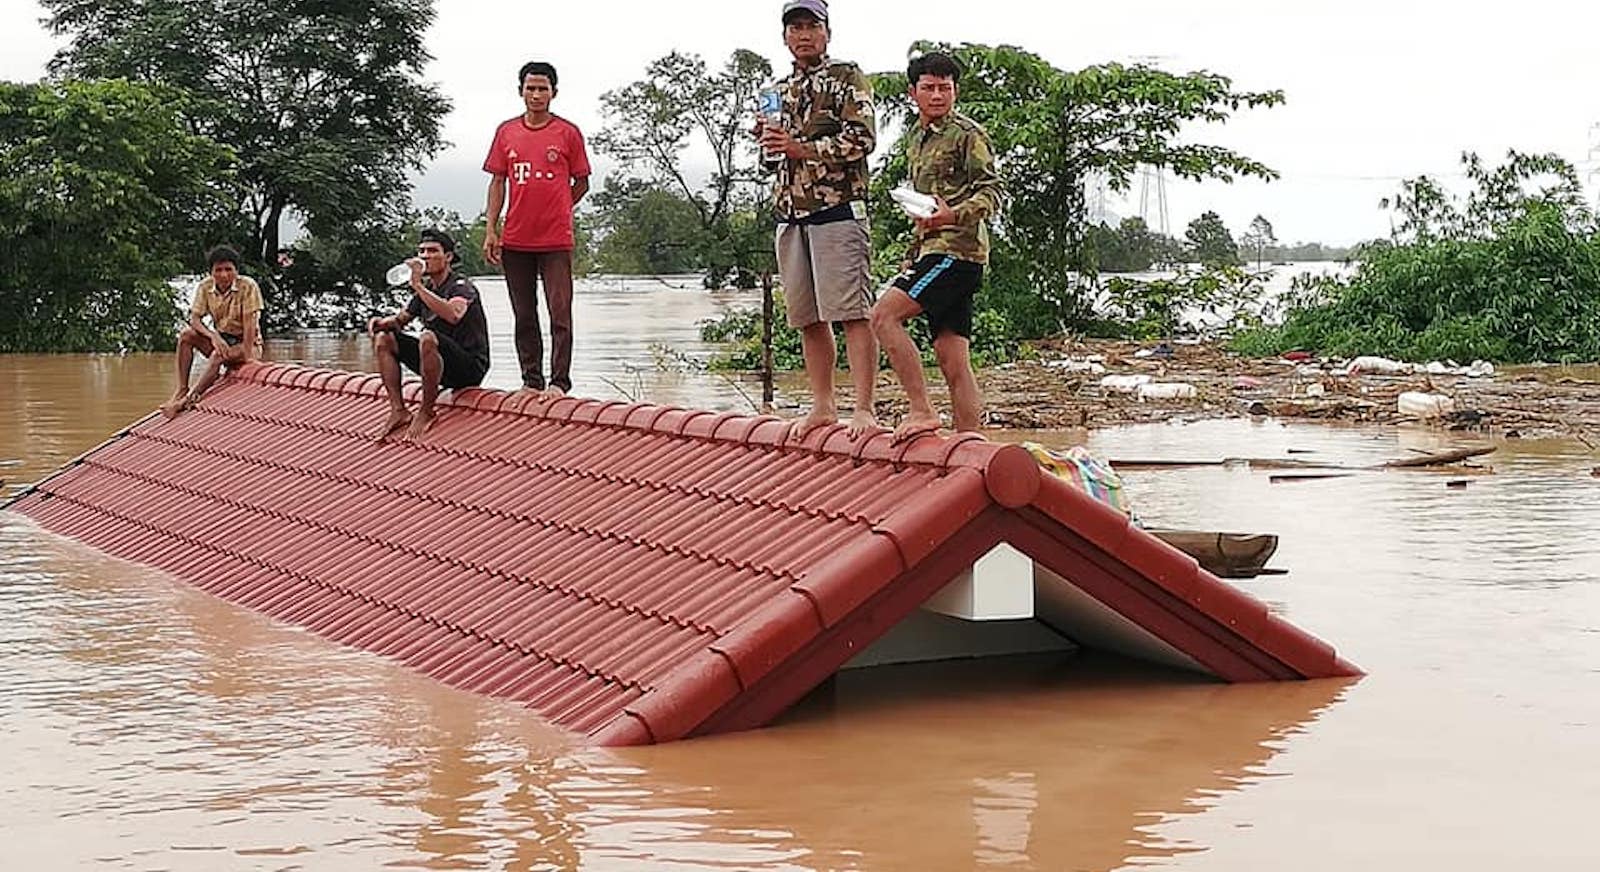 Locals ecape the flood following the dam collapse (Photo: Attapeu Today)